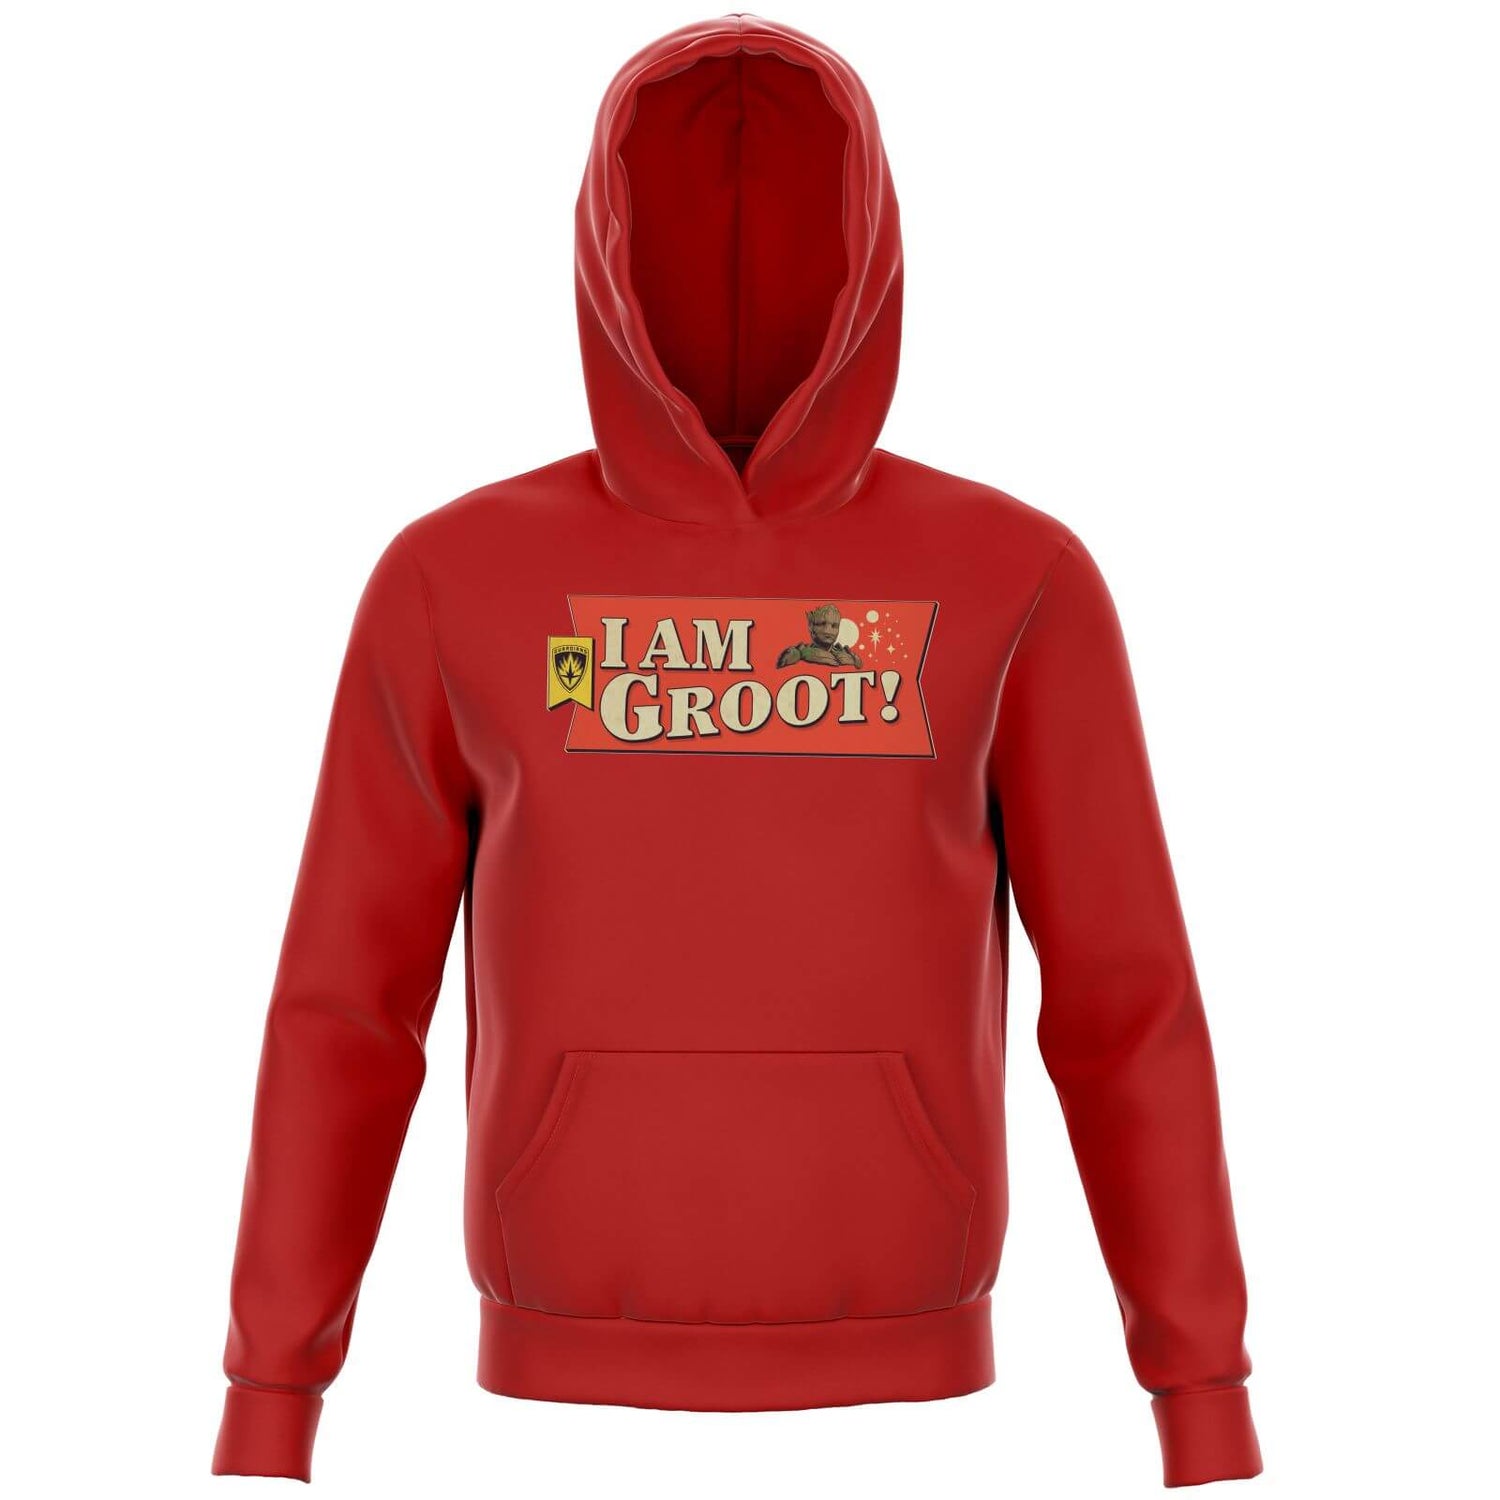 Guardians of the Galaxy I Am Groot! Kids' Hoodie - Red